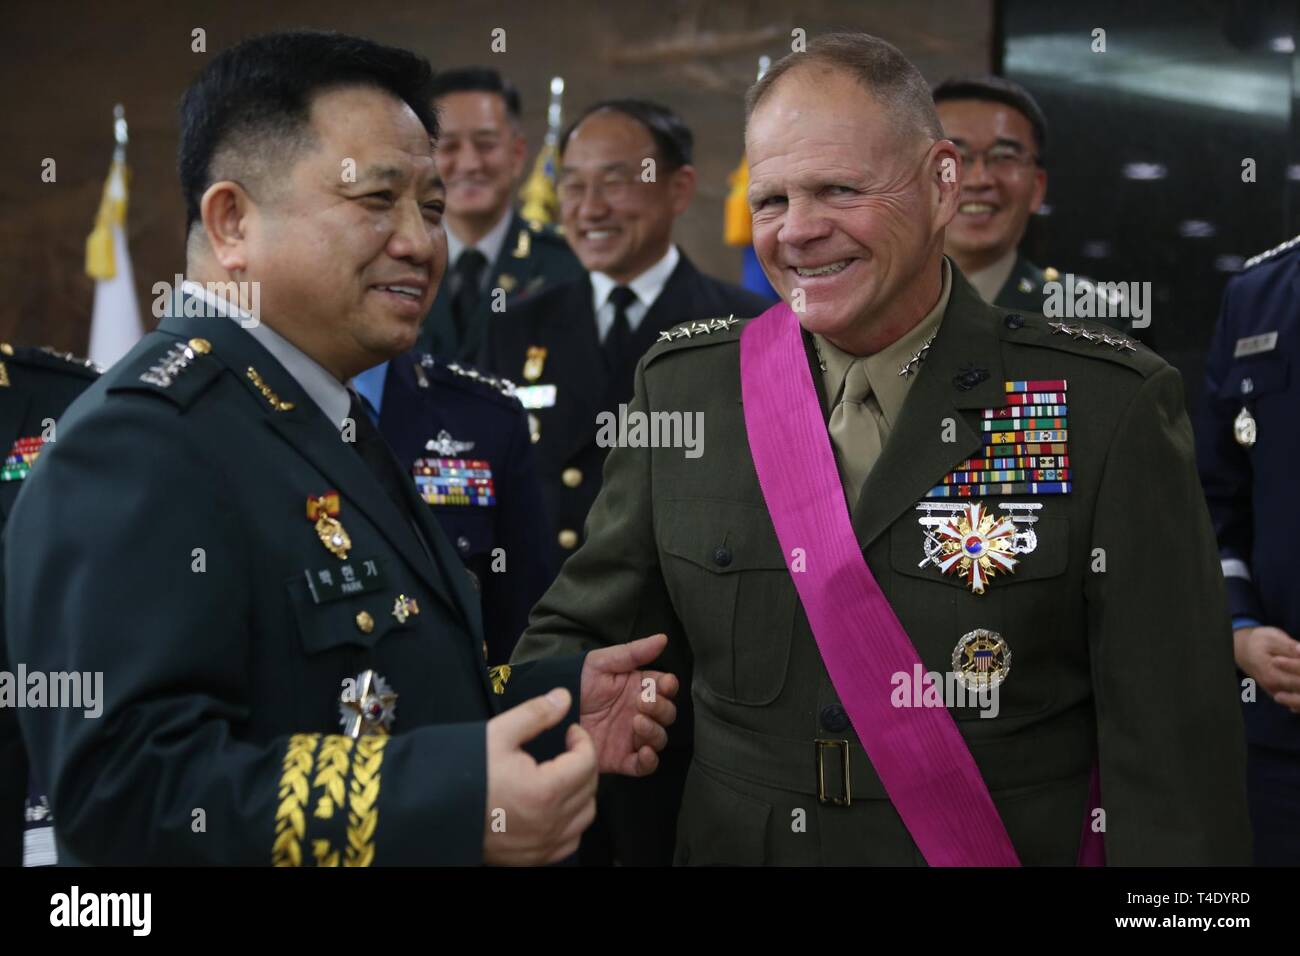 Commandant of the Marine Corps Gen. Robert B. Neller laughs with Republic of Korea Chairman of the Joint Chiefs of Staff, Gen. Park, Han-ki after a ceremony in Yongsan, South Korea, March 28, 2019. Gen. Neller received the Order of National Security Merit in recognition of the partnership between U.S and Korean military forces. Stock Photo